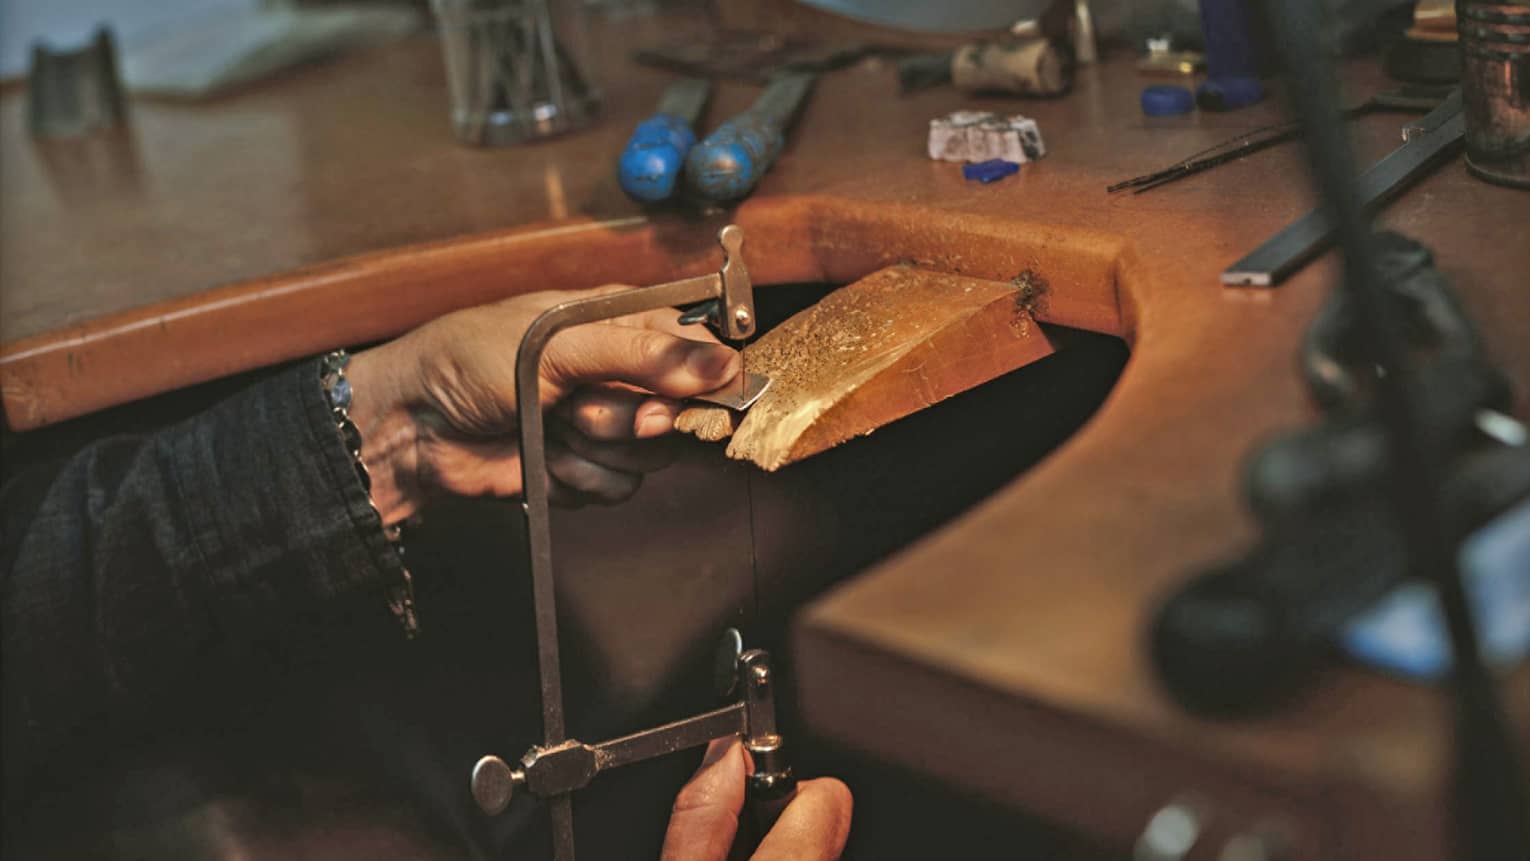 Jeweller's hands adjusting cutting tool to cut jewellery on wooden block